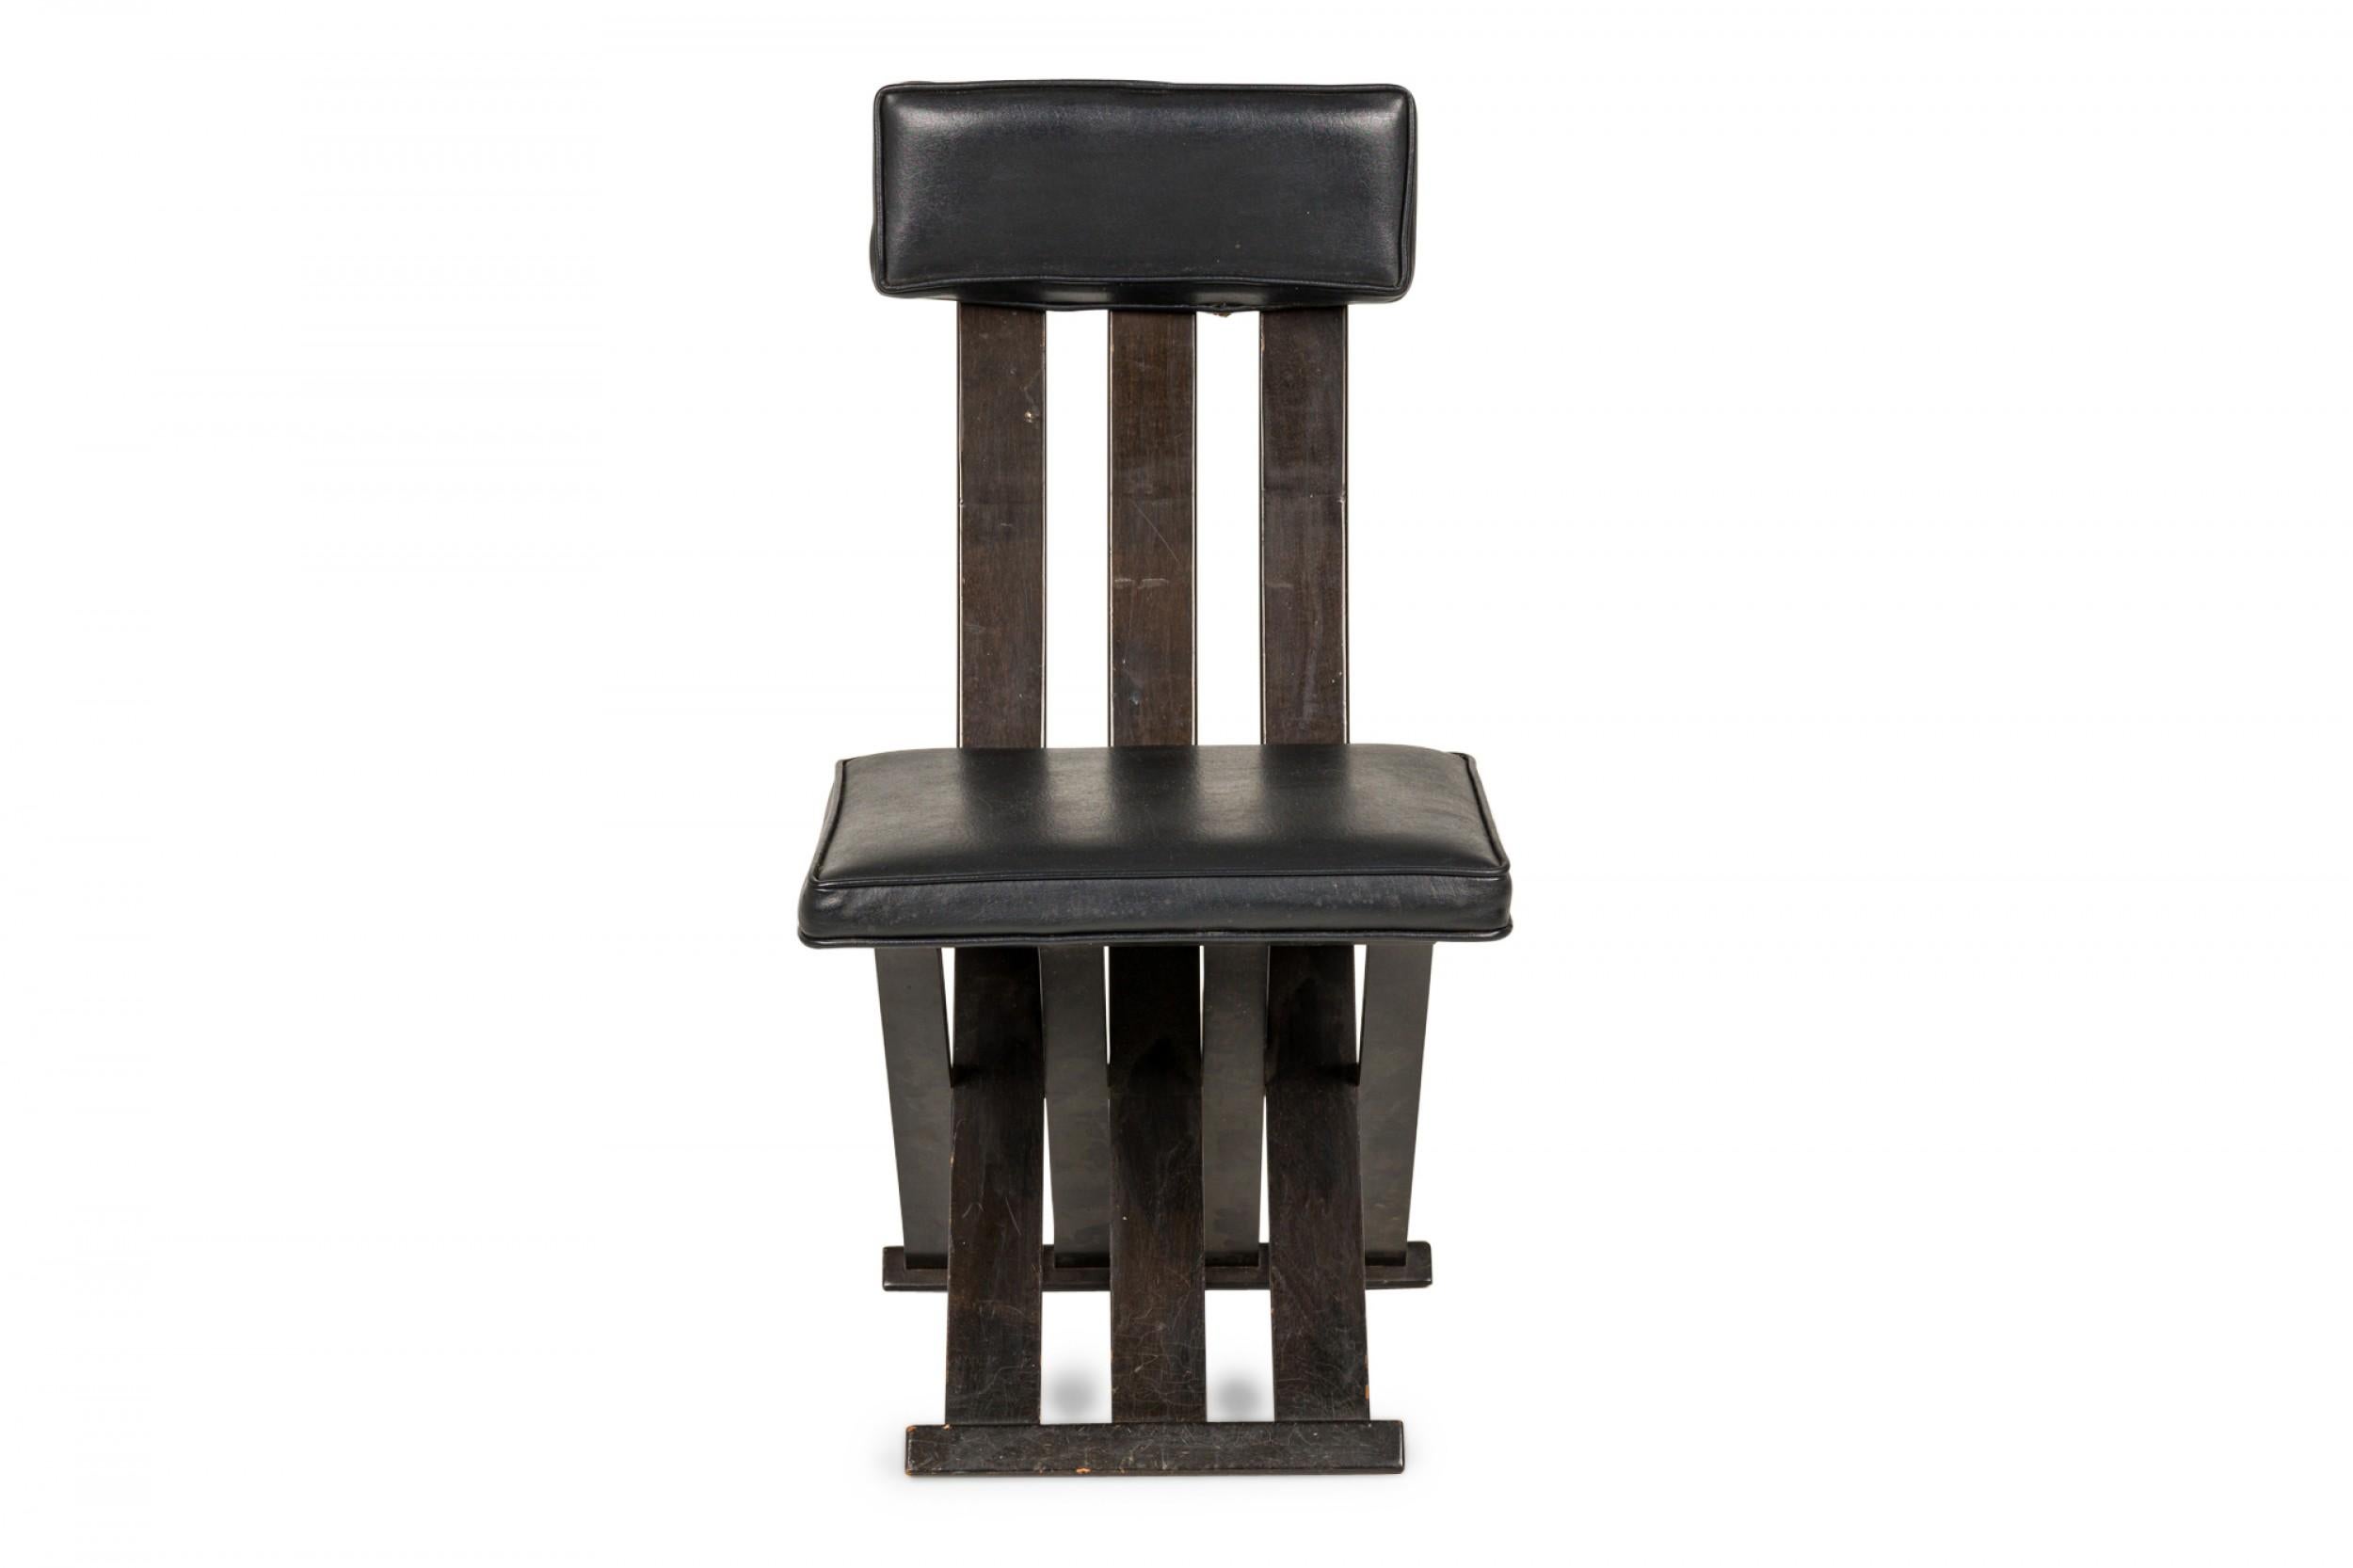 American Mid-Century scissor form dining / side chair with an ebonized wooden frame with a narrow back comprised of three vertical slats, with a black leather upholstered seat and small rectangular back cushion, resting on a three slat scissor-form